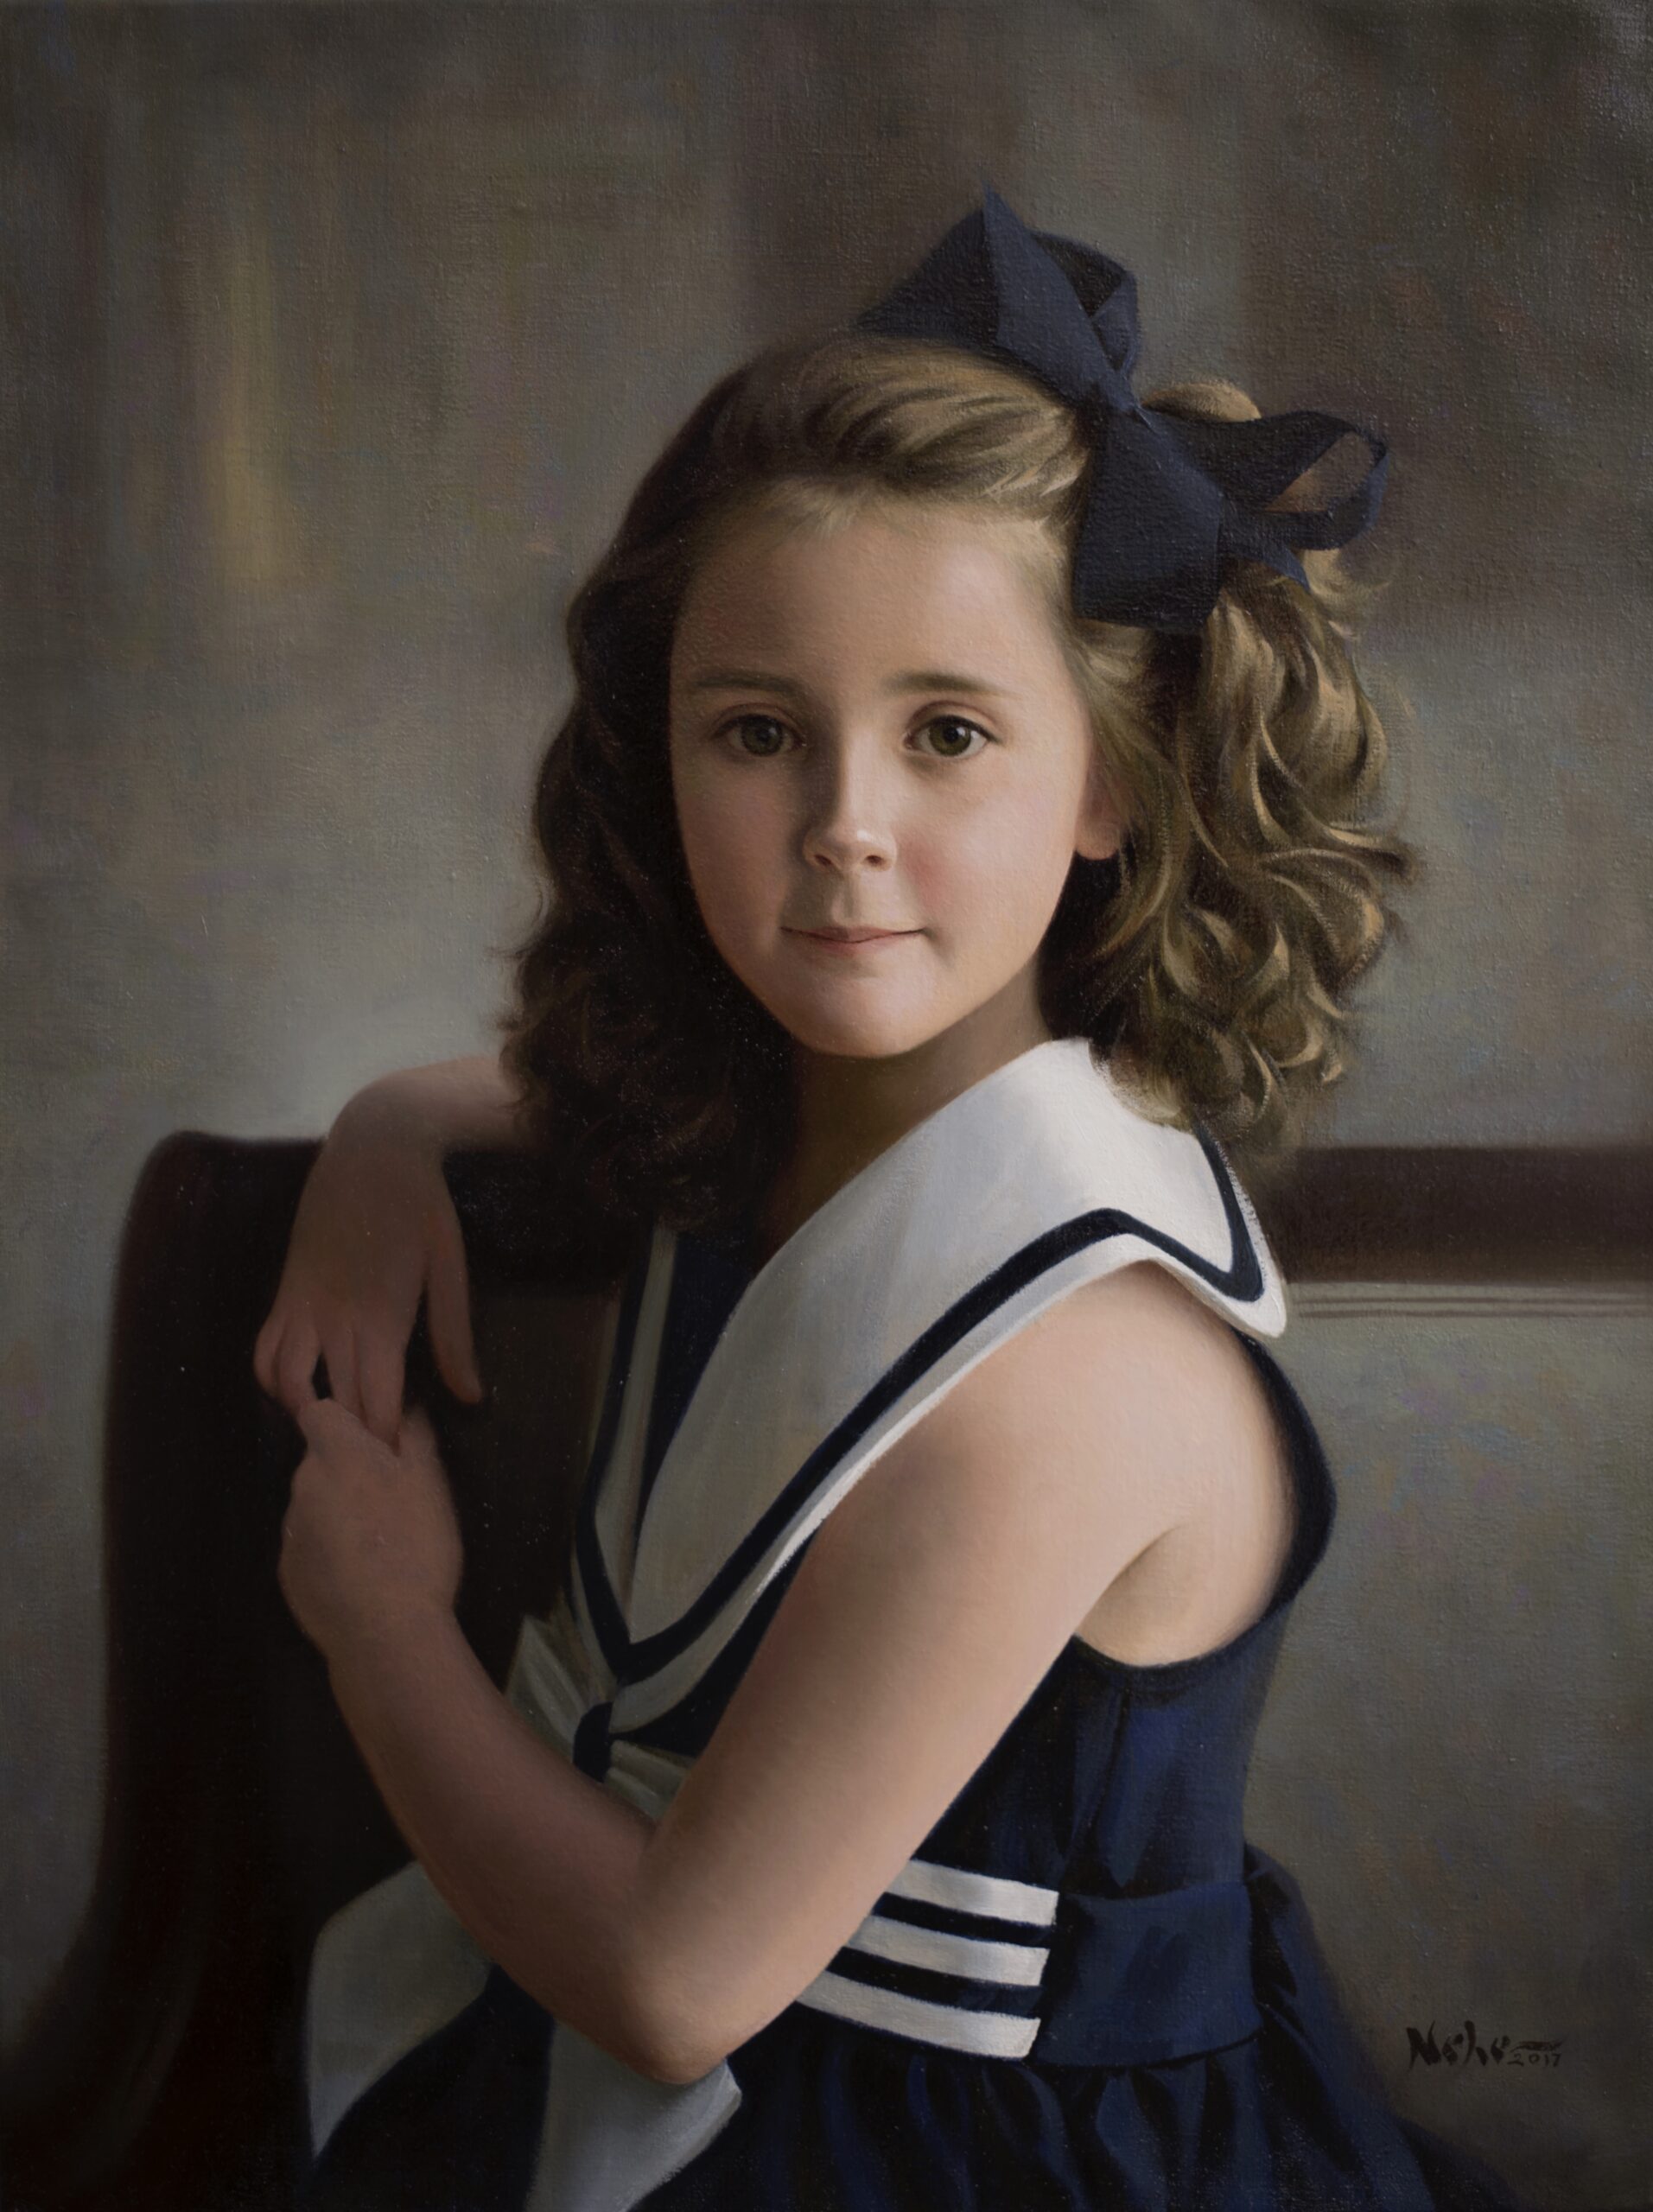 A portrait of young girl in a navy blue dress